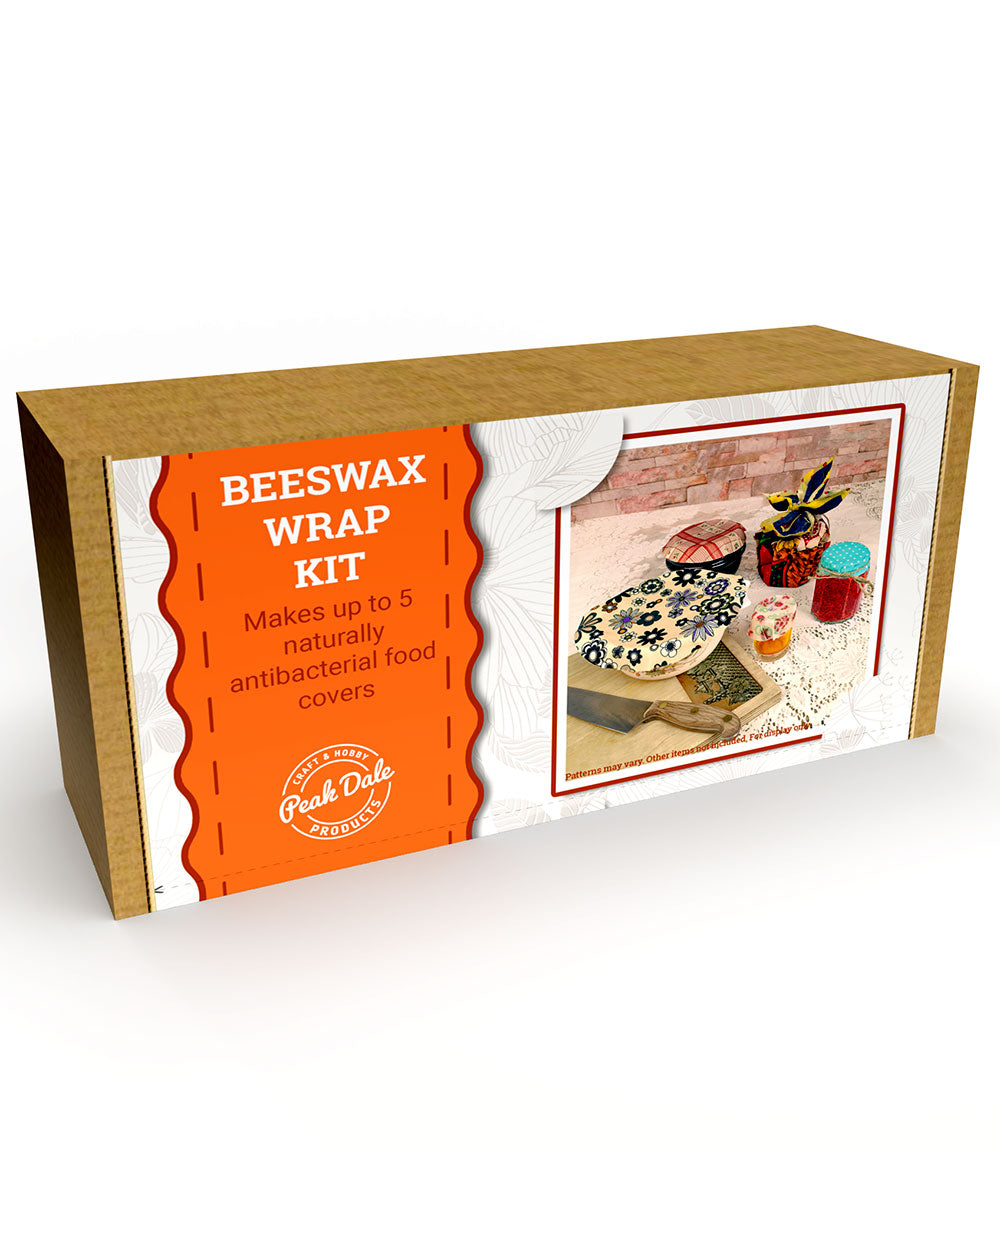 Want to reduce your use of single-use plastic? This Beeswax Food Cover Craft Kits could be just the solution.  Beeswax is an all-natural, antibacterial, waterproof and eco-friendly super material. The amazing properties of beeswax are perfect for the preservation of food.